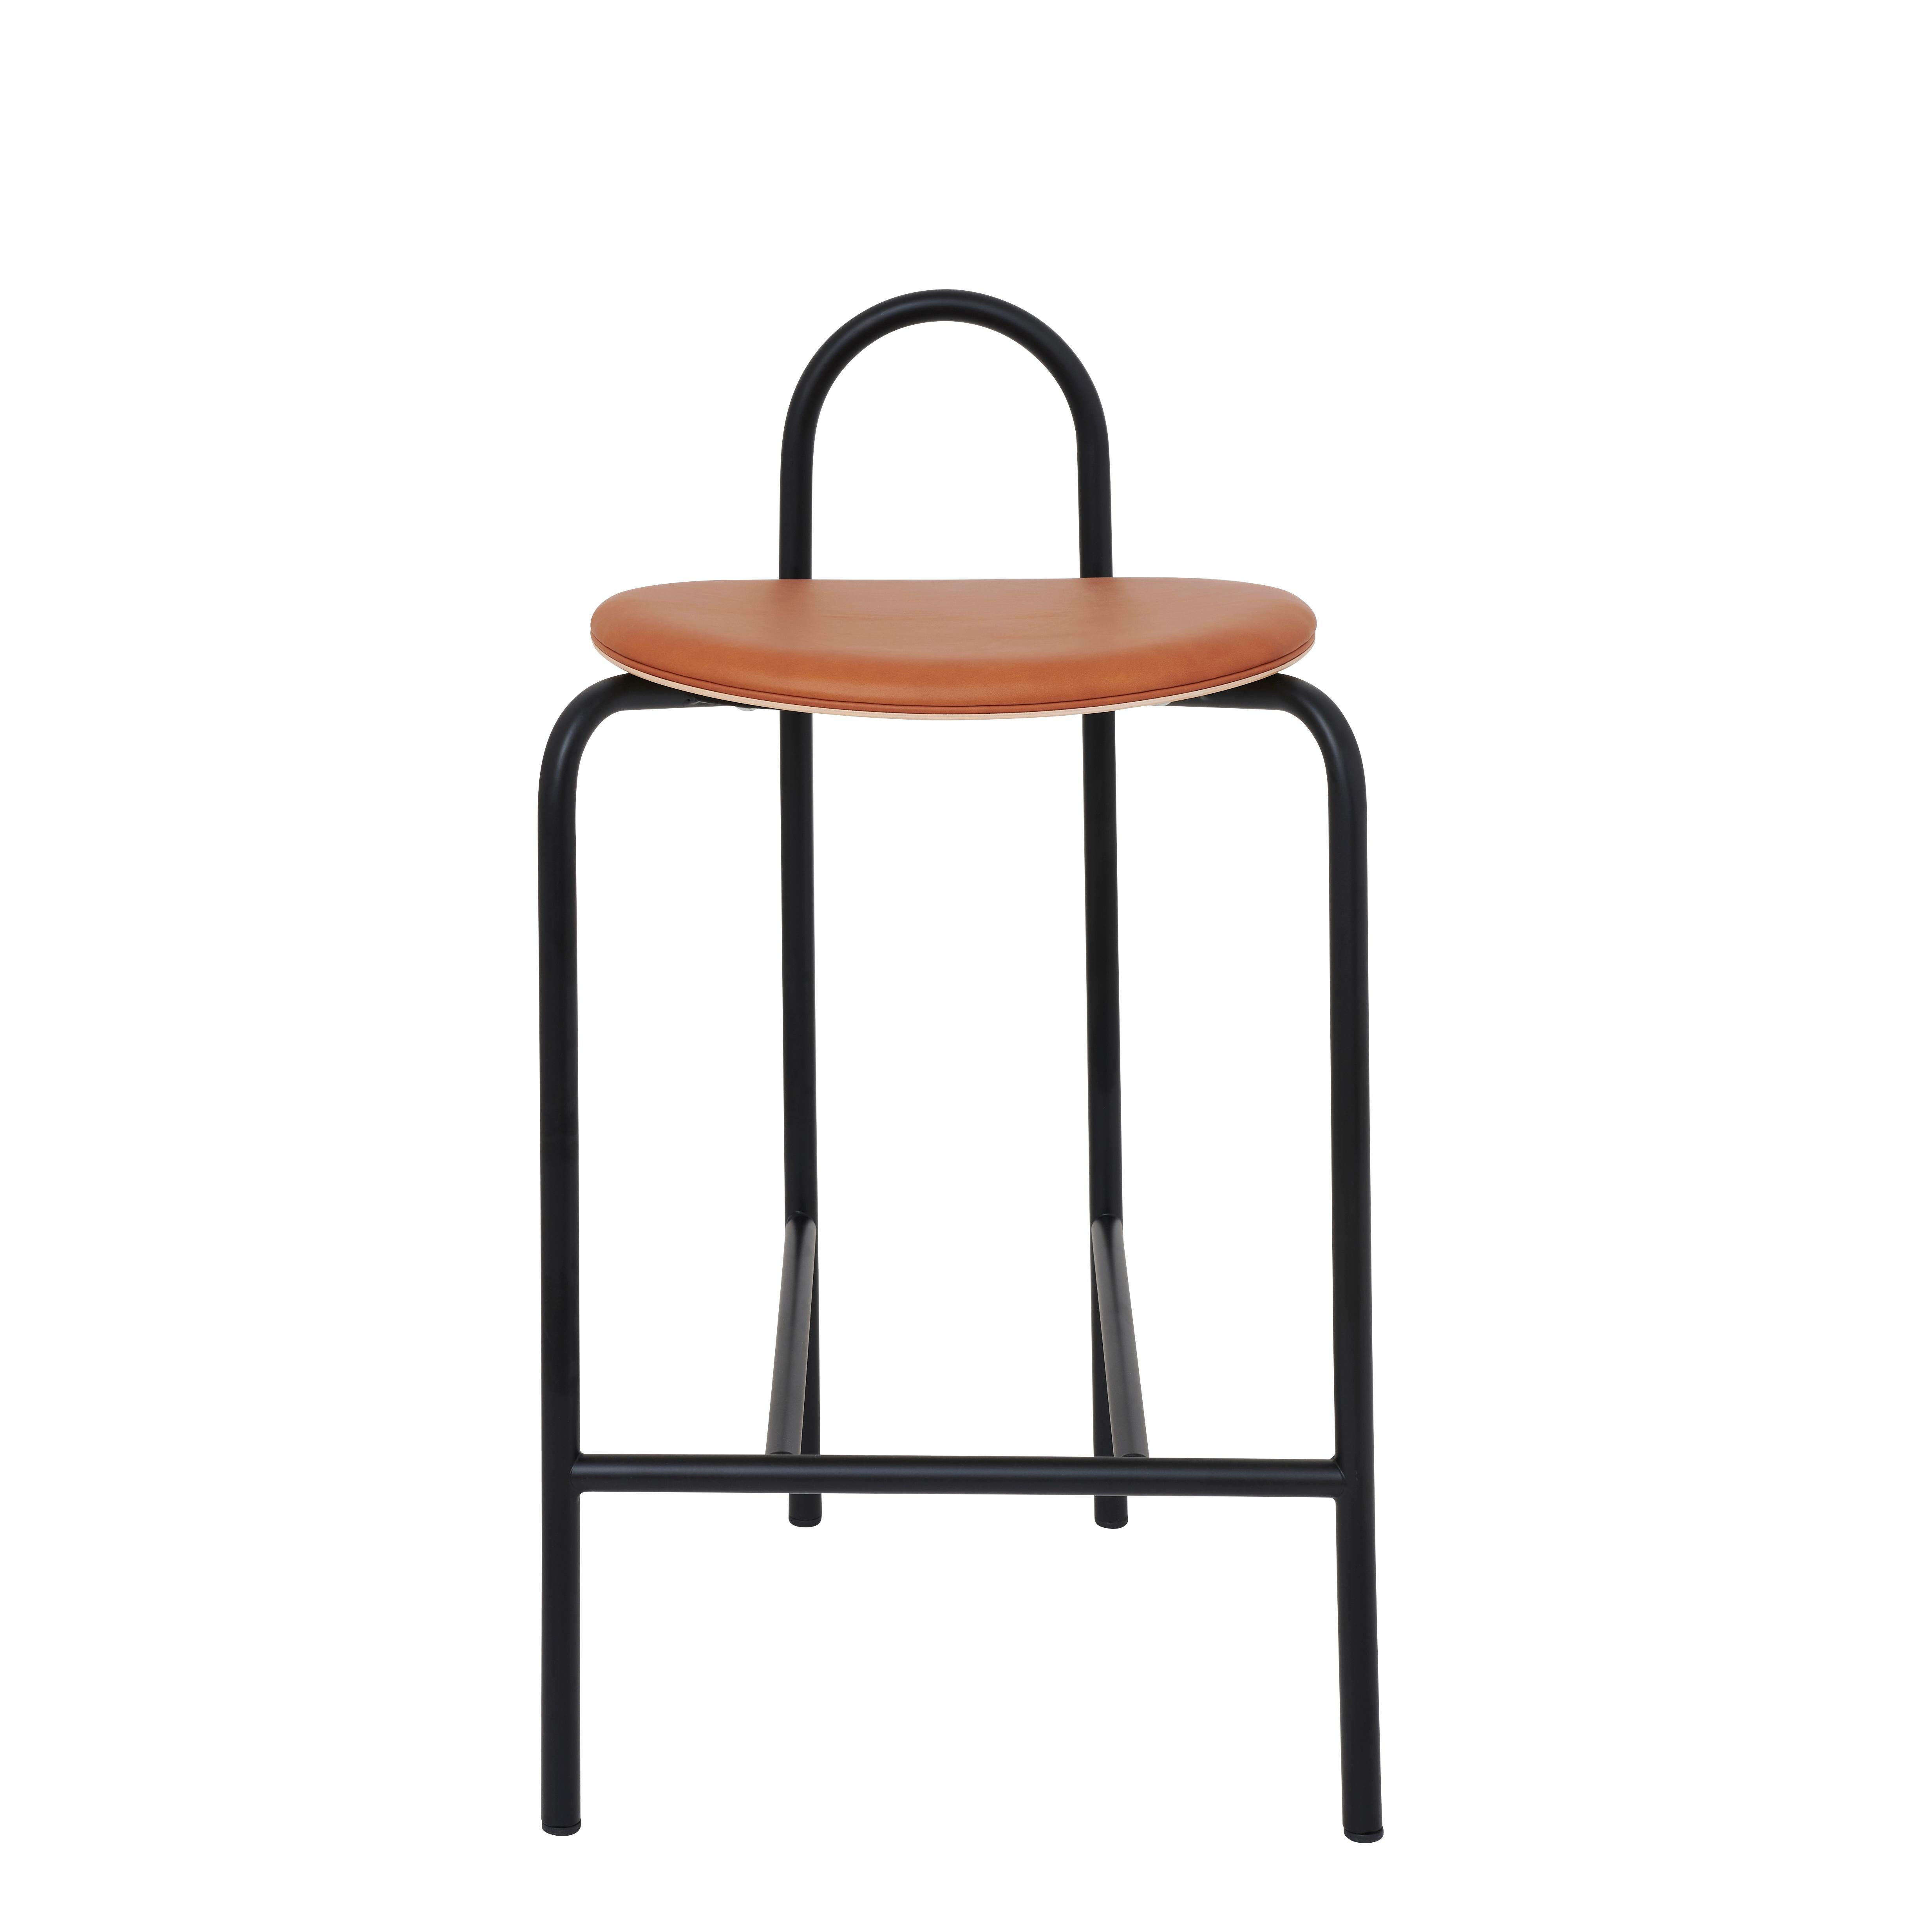 A natural extension to the popular Michelle chair, the Michelle stool continues to play on the visual application of the arc, creating a simple, striking and highly adaptable stool for any interior.

About this finishing:
Seat: Edinburgh Cognac